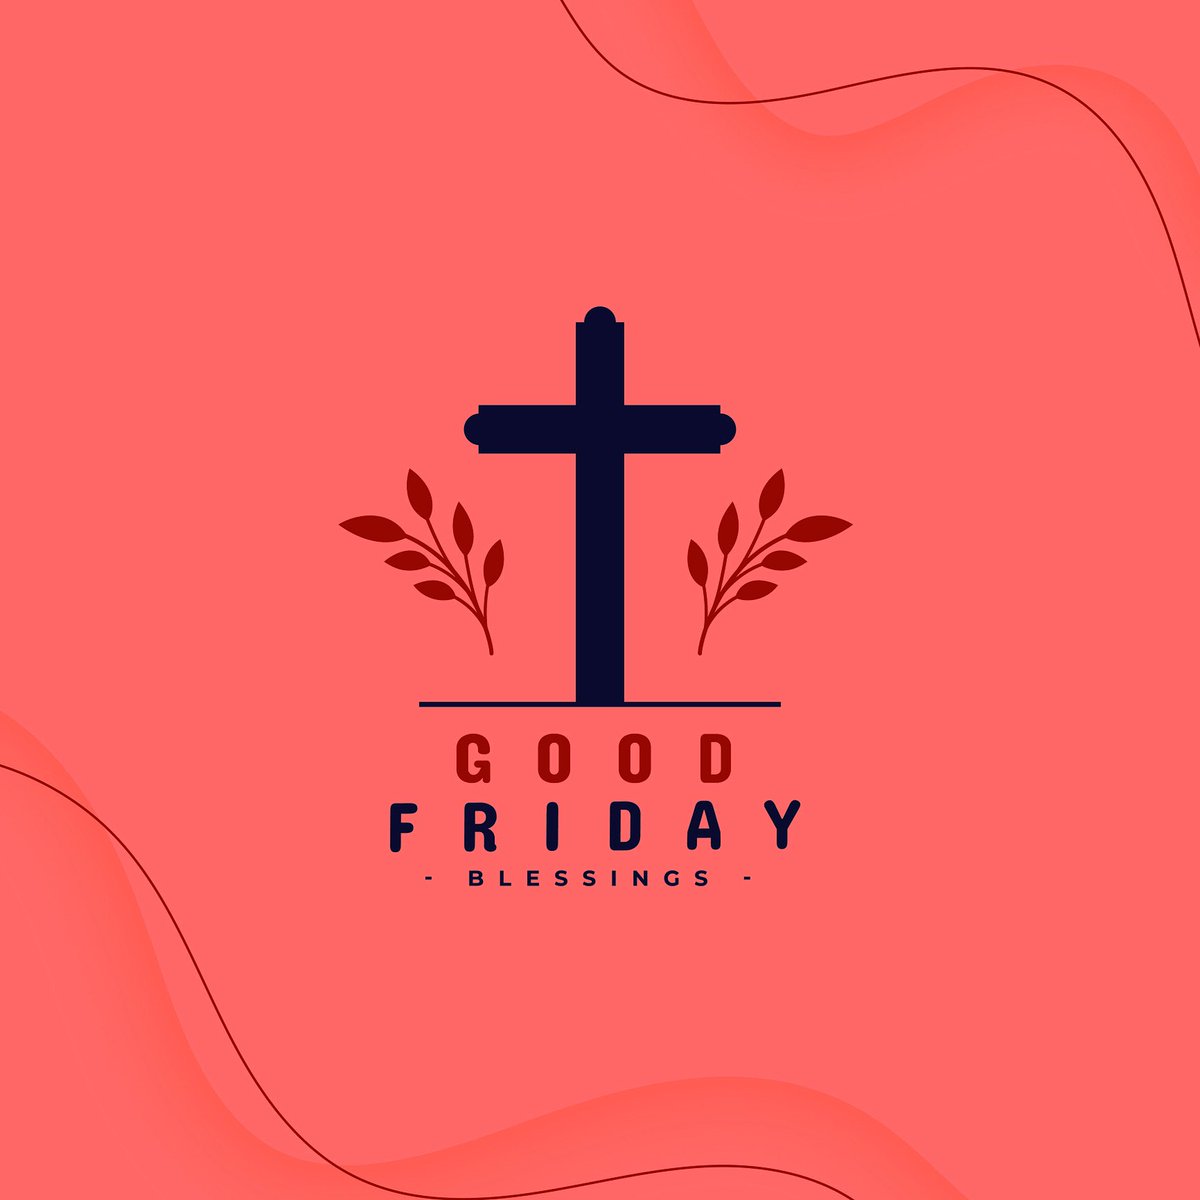 Bishop Dunne would like to wish the Falcon family and extended Bishop Dunne community a happy and blessed Good Friday. #falconpride #goodfriday #bishopdunne